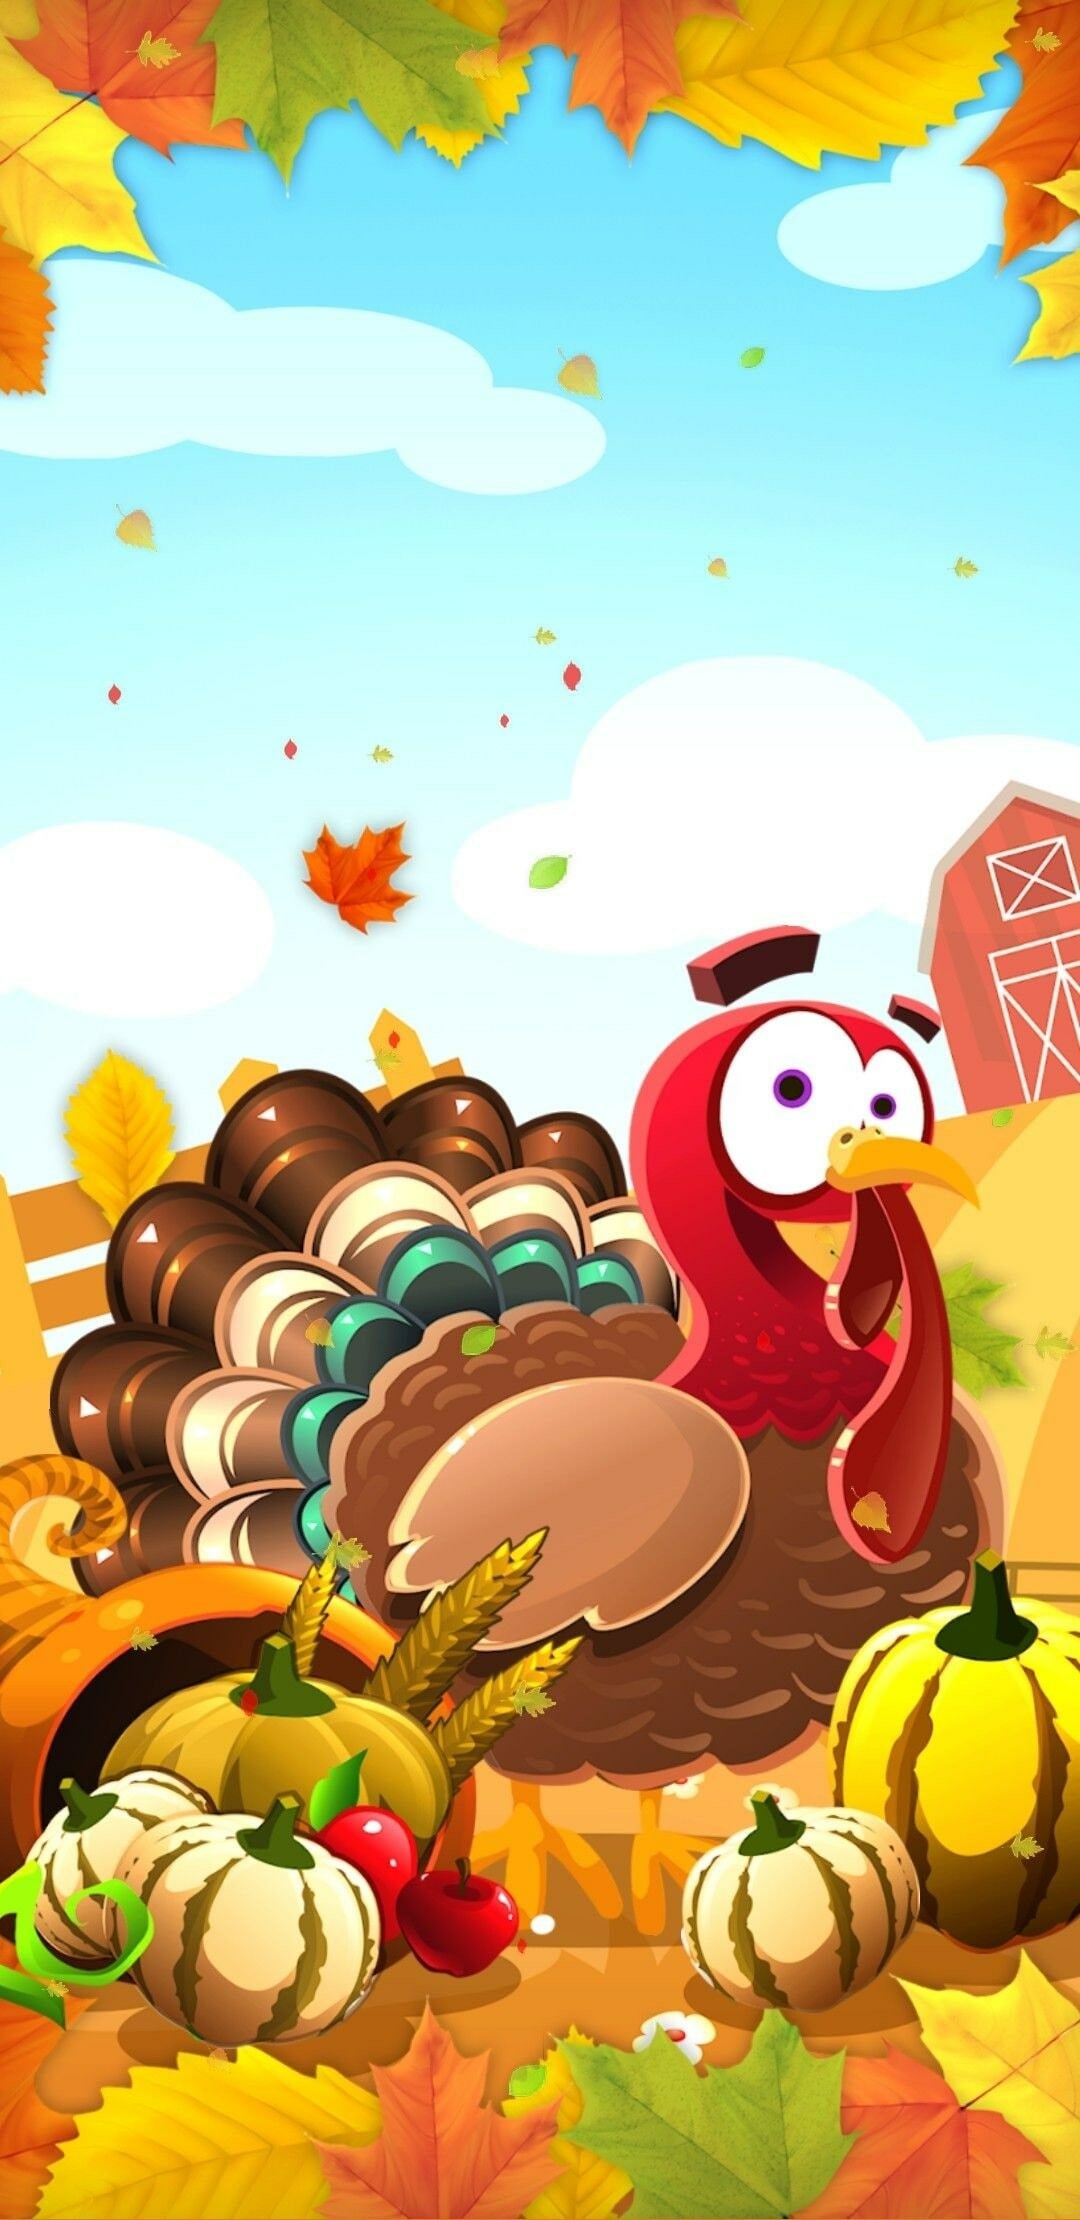 Thanksgiving: One of the nation's most widely celebrated secular holidays, Illustration. 1080x2220 HD Wallpaper.